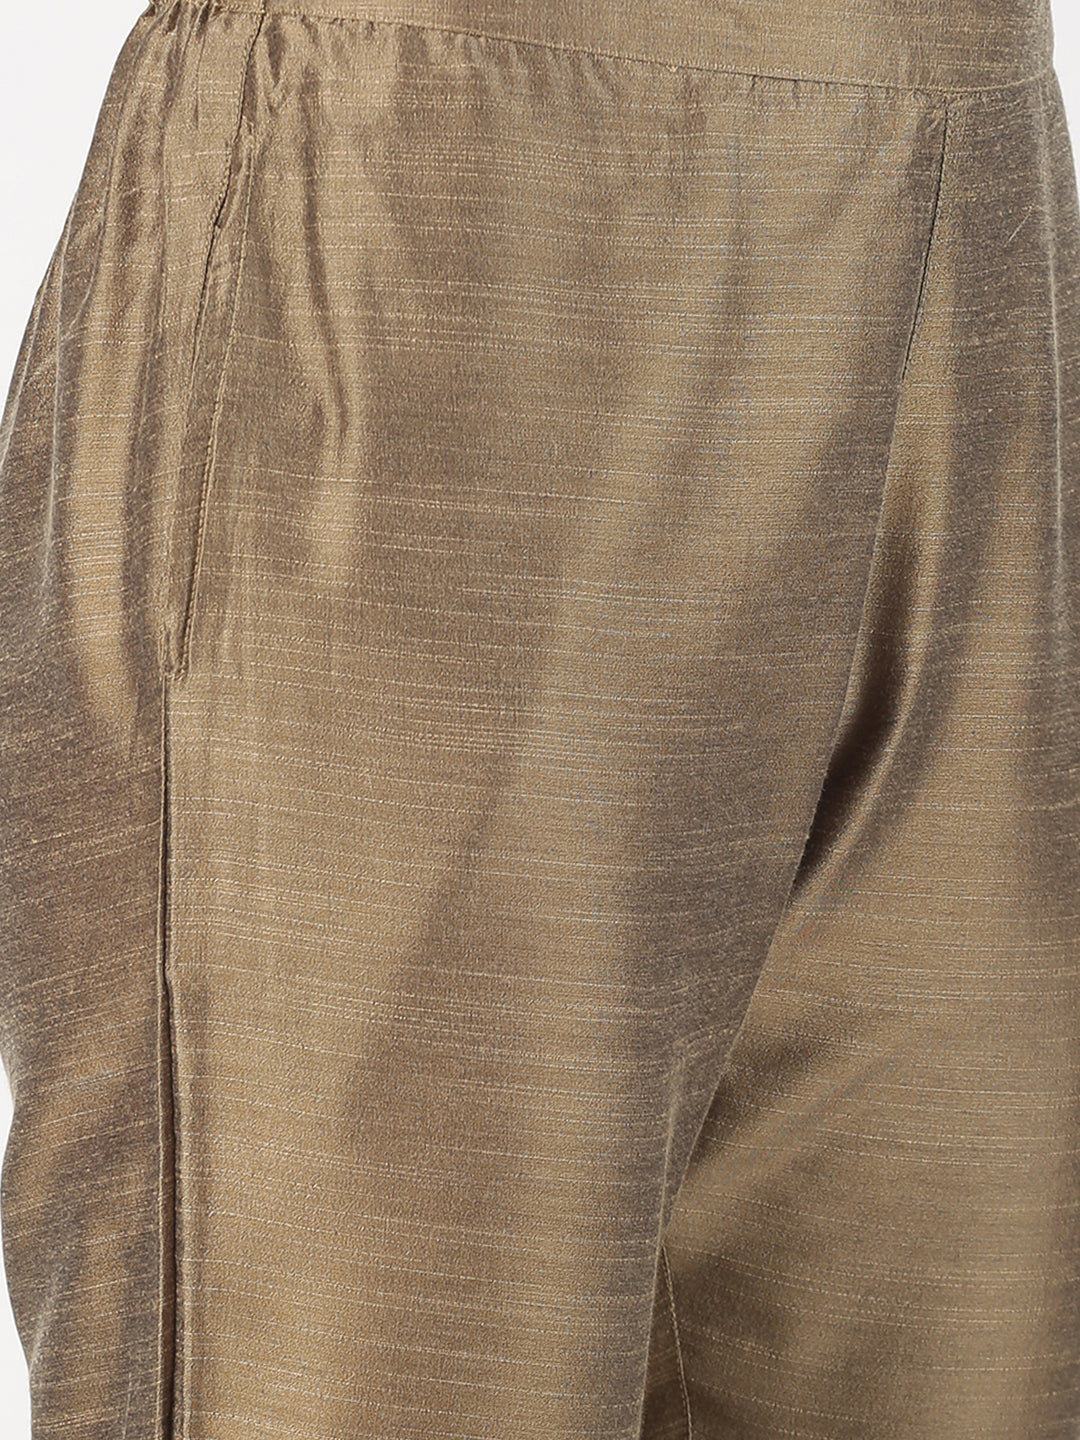 Pack of 2 Gold & Silver Art Silk Trousers